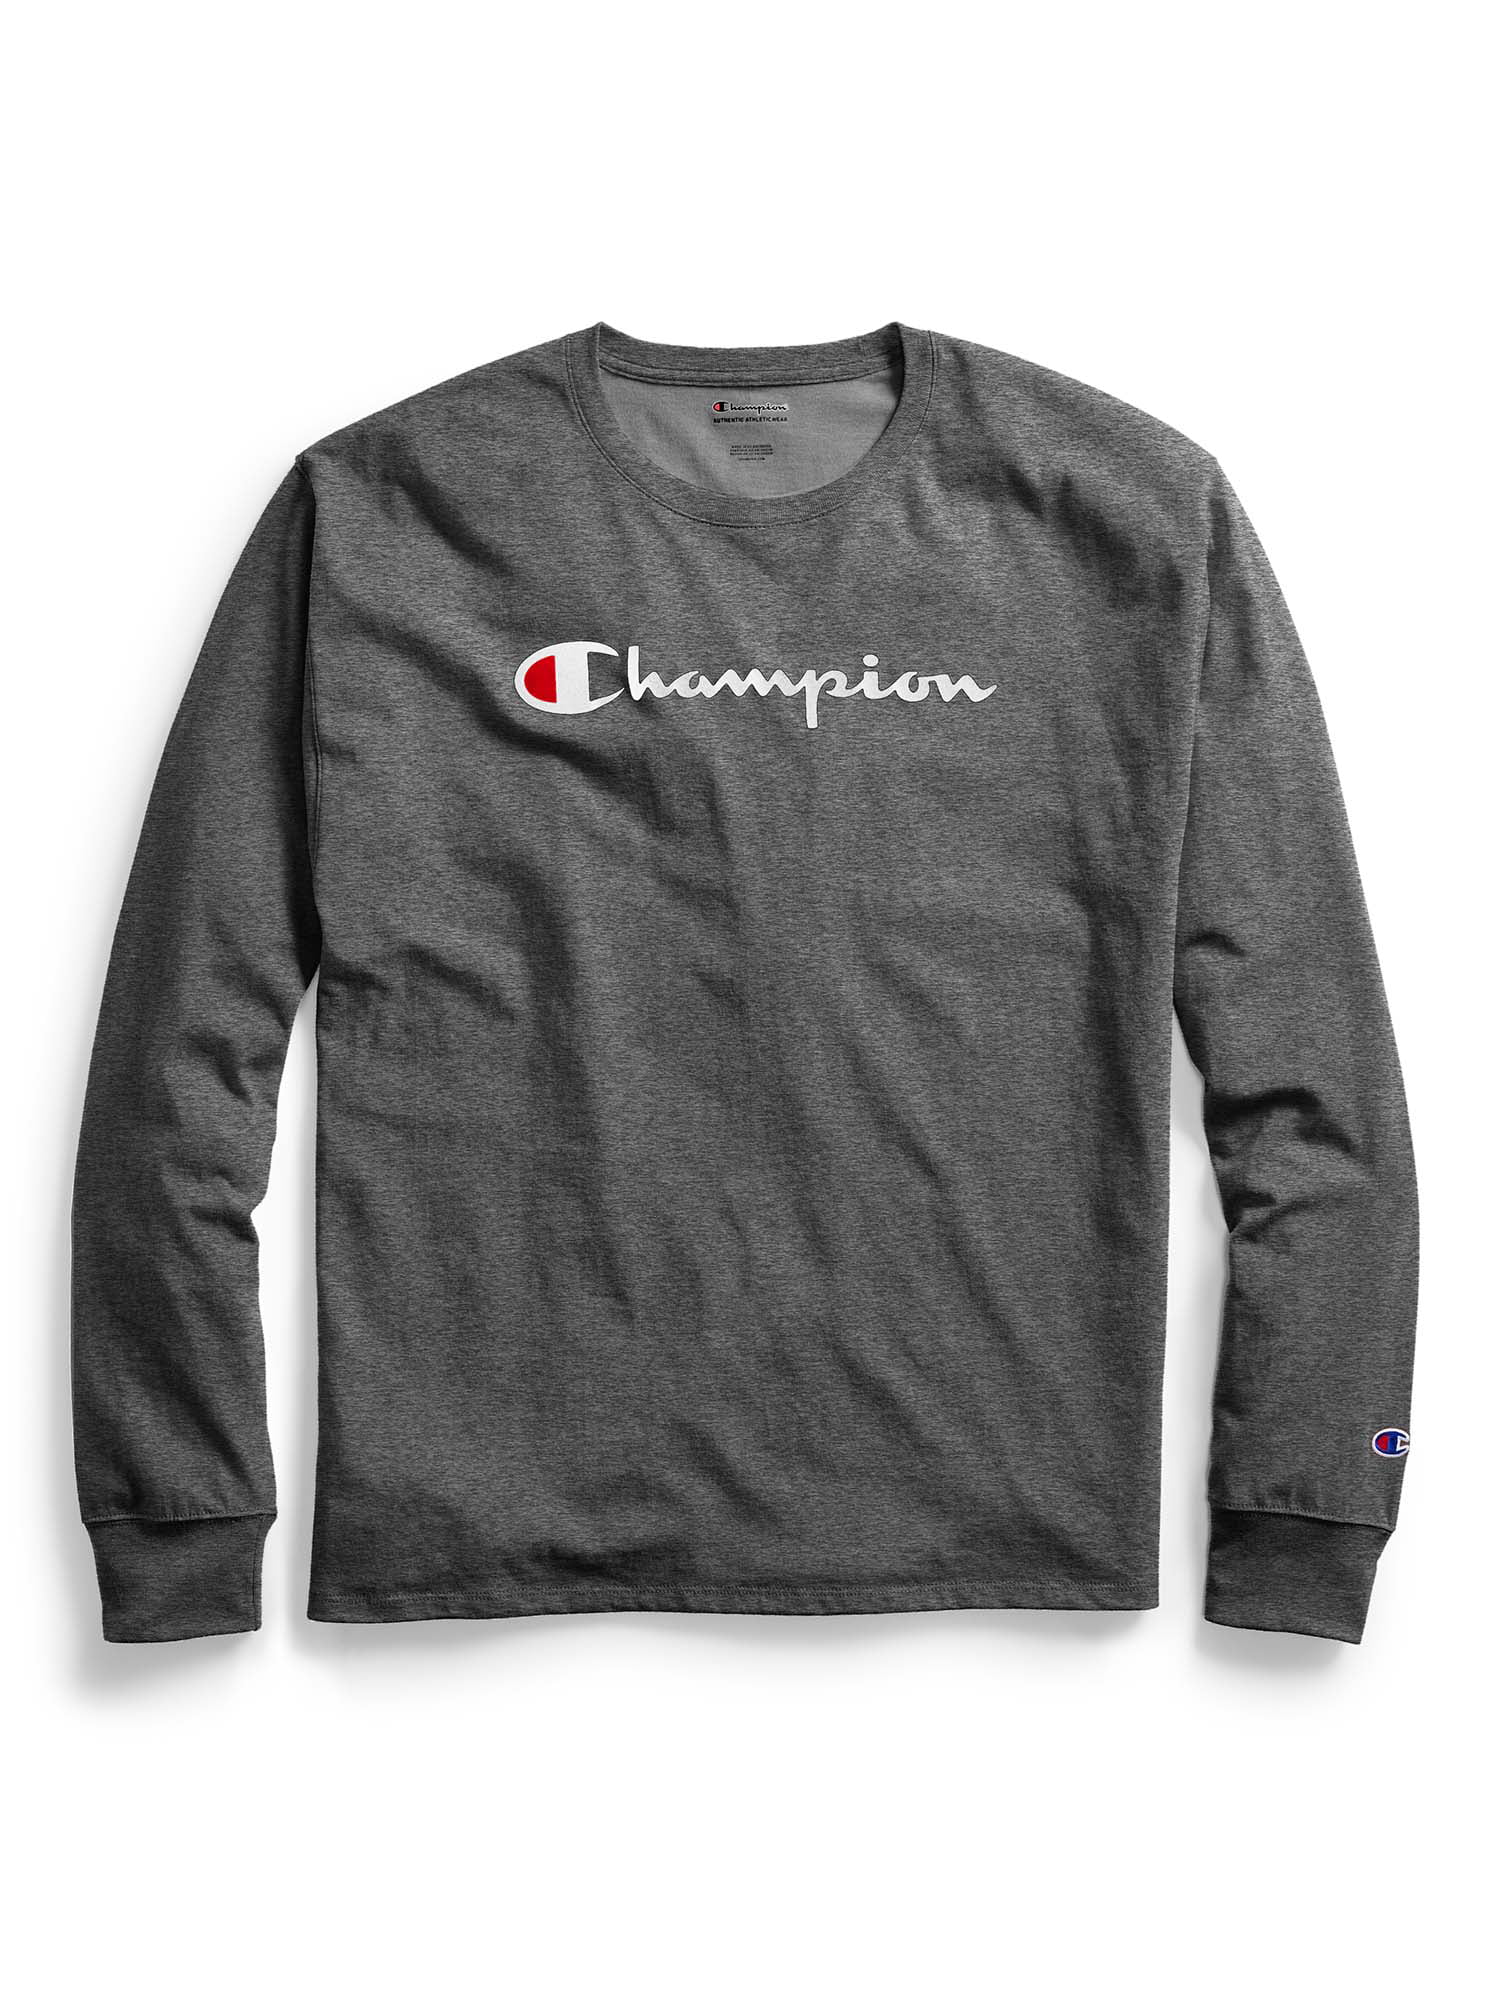 Champion Mens Big and Tall Long Sleeve T Shirt with Script Logo on Arm 